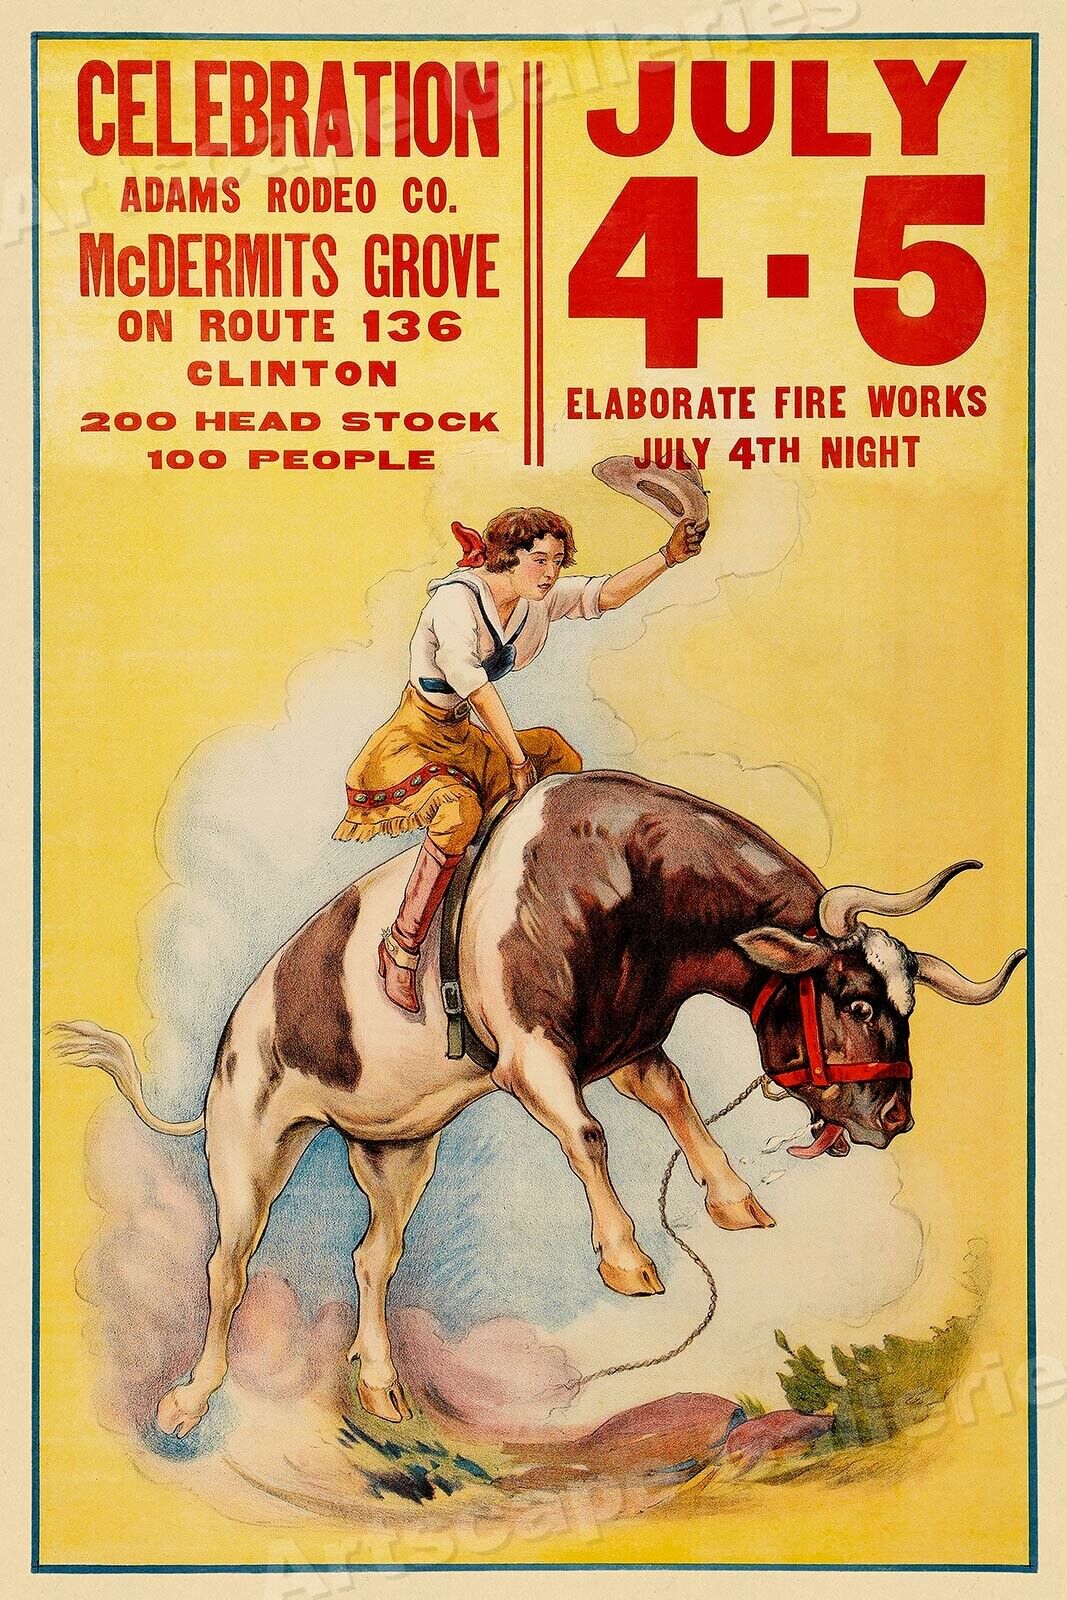 1930s Western Adams Rodeo Celebration Steer Bronc Riding Poster - 24x36